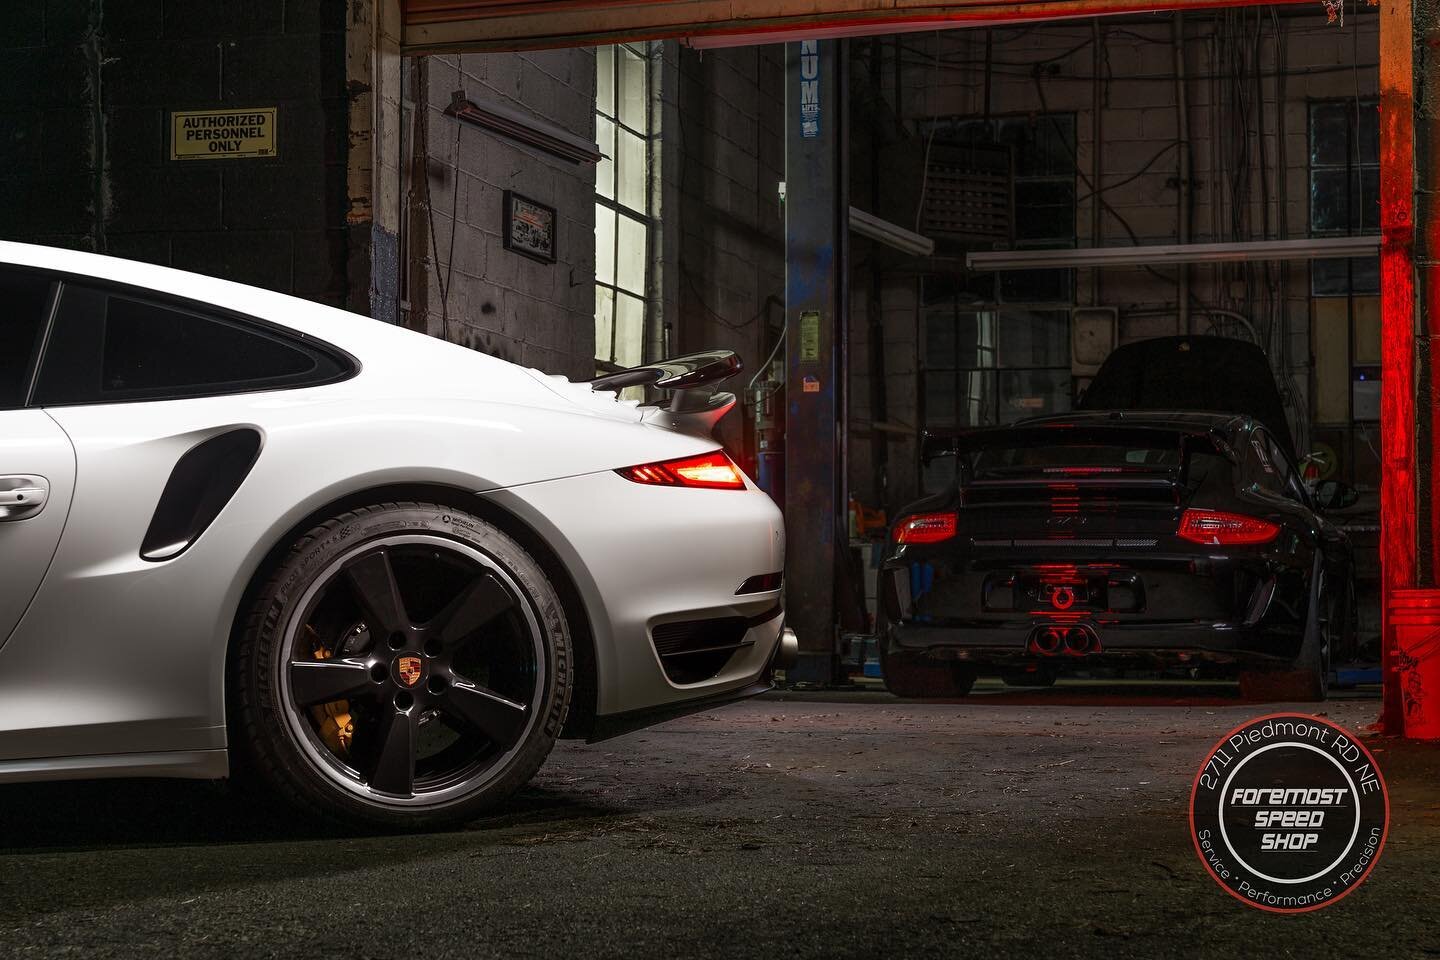 Our friend @whoisdakari dropped by one late night for a little one on one with a clients beautiful 991 Turbo S and 997.2 GT3. 

As expected he delivered us a masterpiece. For this we&rsquo;re extremely thankful. 

It&rsquo;s thanksgiving week, we hop